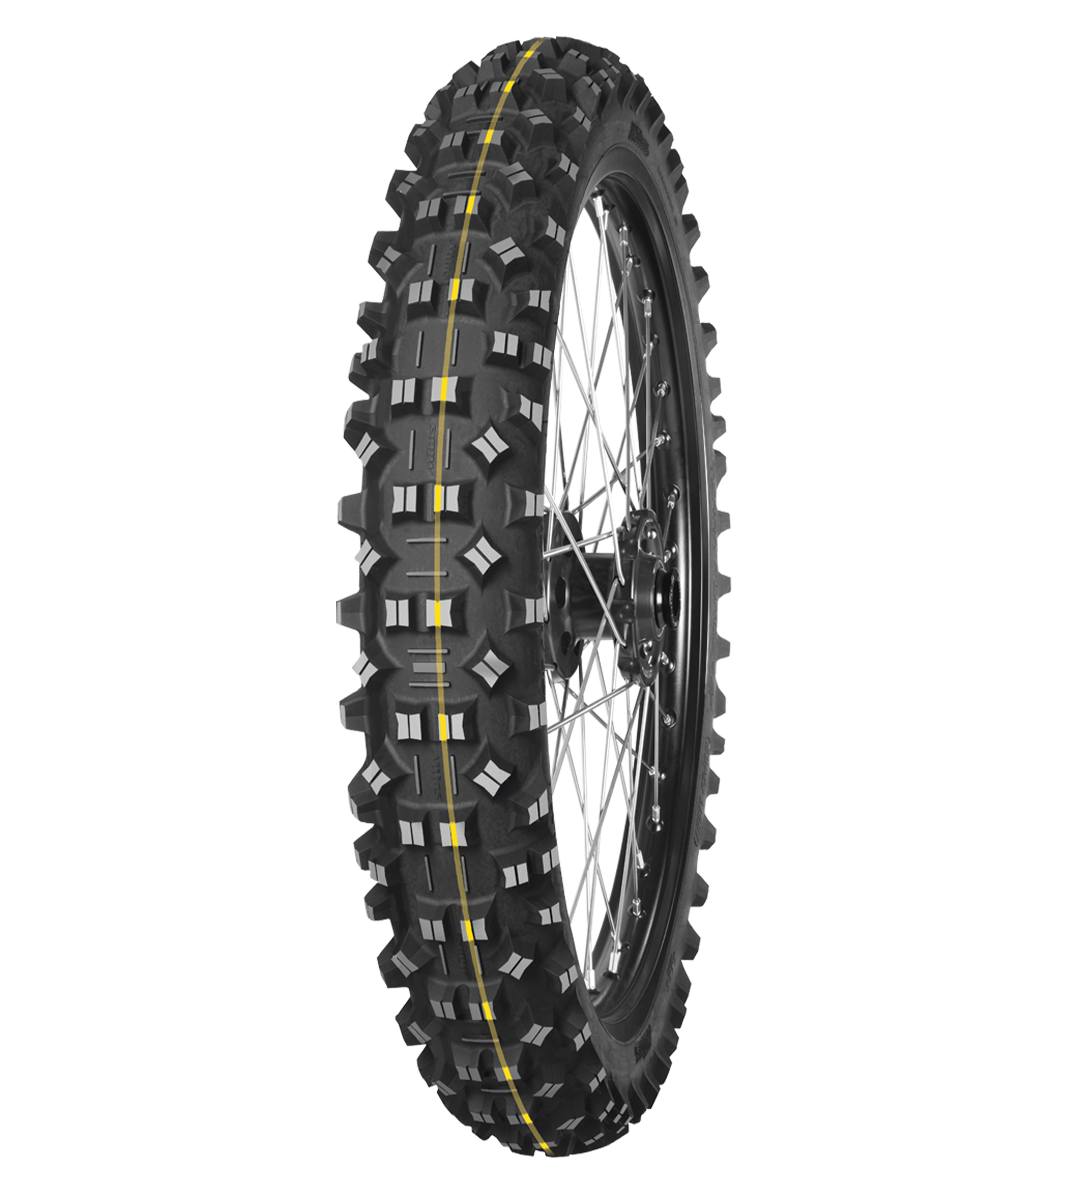 Mitas TERRA FORCE-EF 90/100-21 Enduro Competition Off-Road SUPER 57R Yellow Tube Front Tire, 226745, 90/100-21, Enduro Competition, Front, Off-Road, Terra Force, Terra Force-EF, Trail, Tires - Imported and distributed in North & South America by Lindeco Genuine Powersports - Premier Powersports Equipment and Accessories for Motorcycle Enthusiasts, Professional Riders and Dealers.